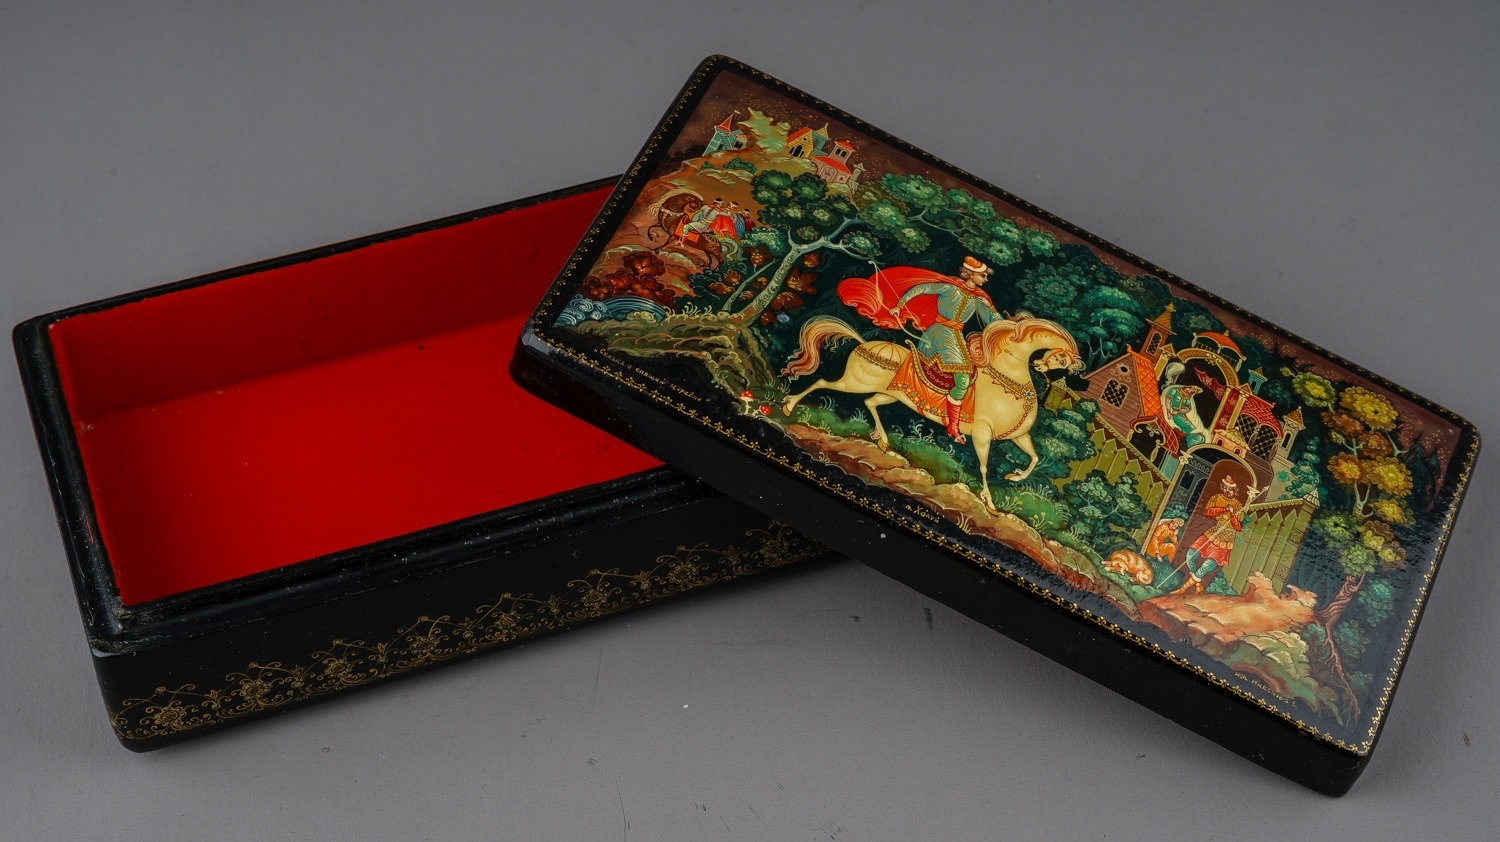 Soviet era Russian hand painted lacquered box, signed to lower right and left and marked made in - Image 2 of 3